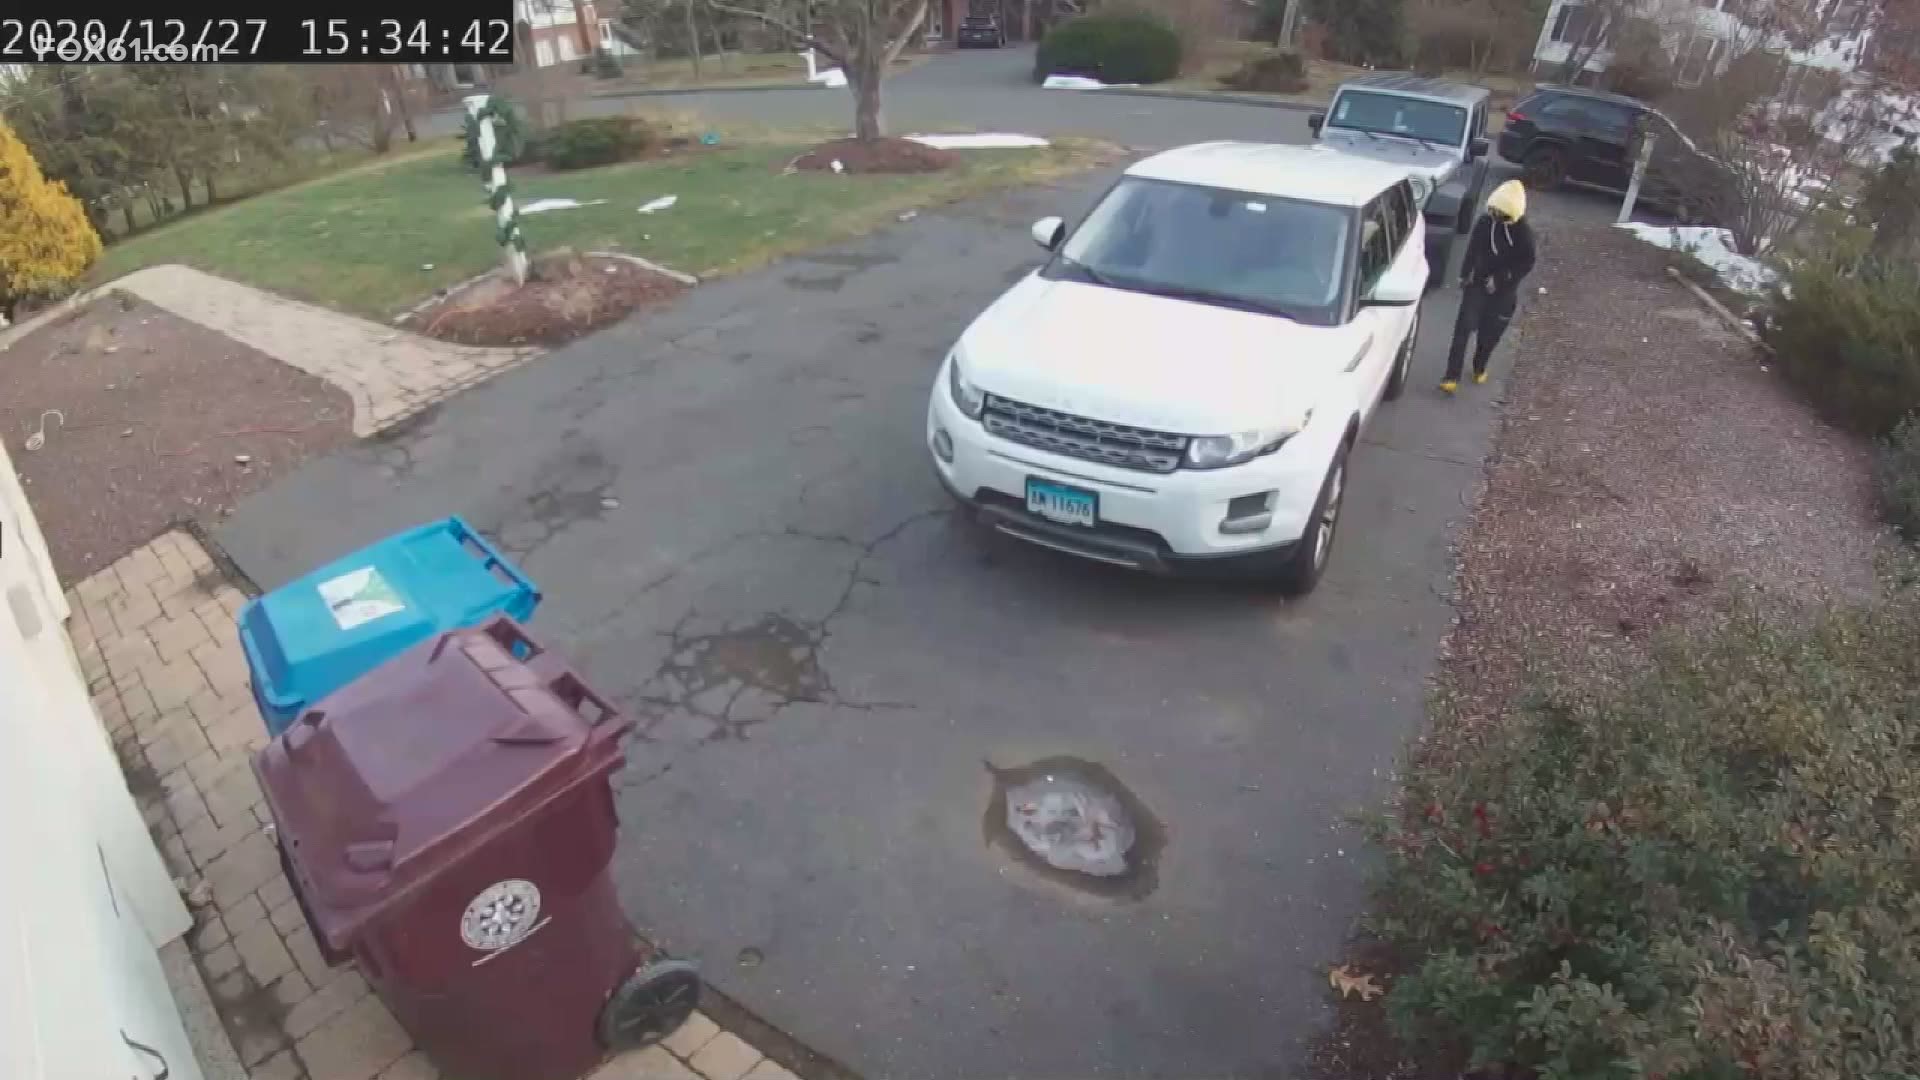 A Farmington family was shocked to find their car stolen, even though it was blocked in their driveway